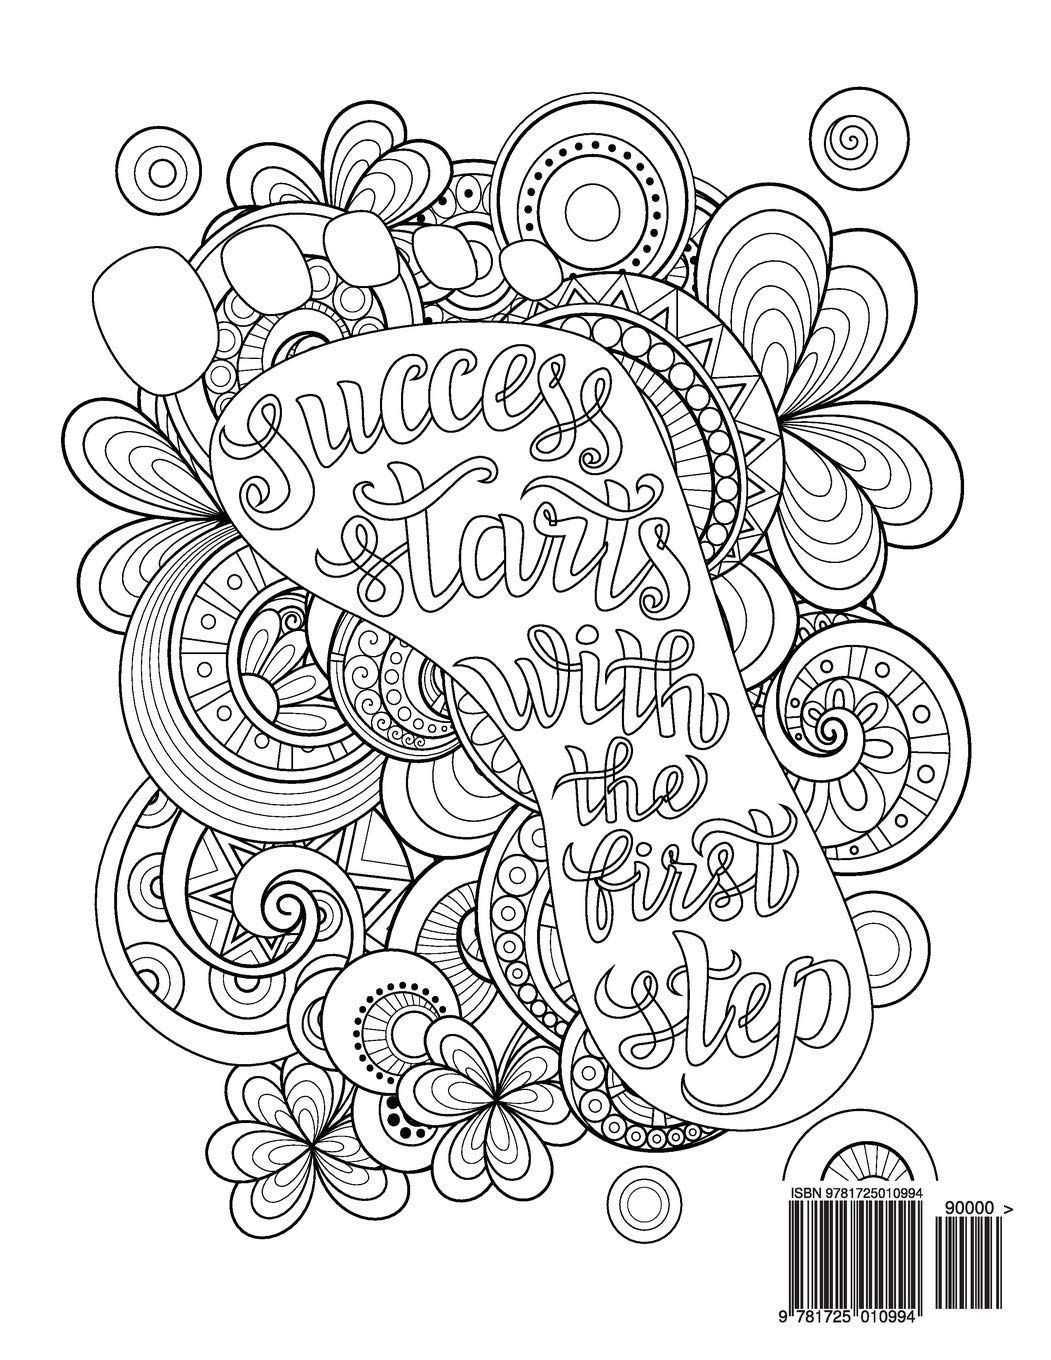 Tremendous Quote Coloring Pages For ...sstra.org